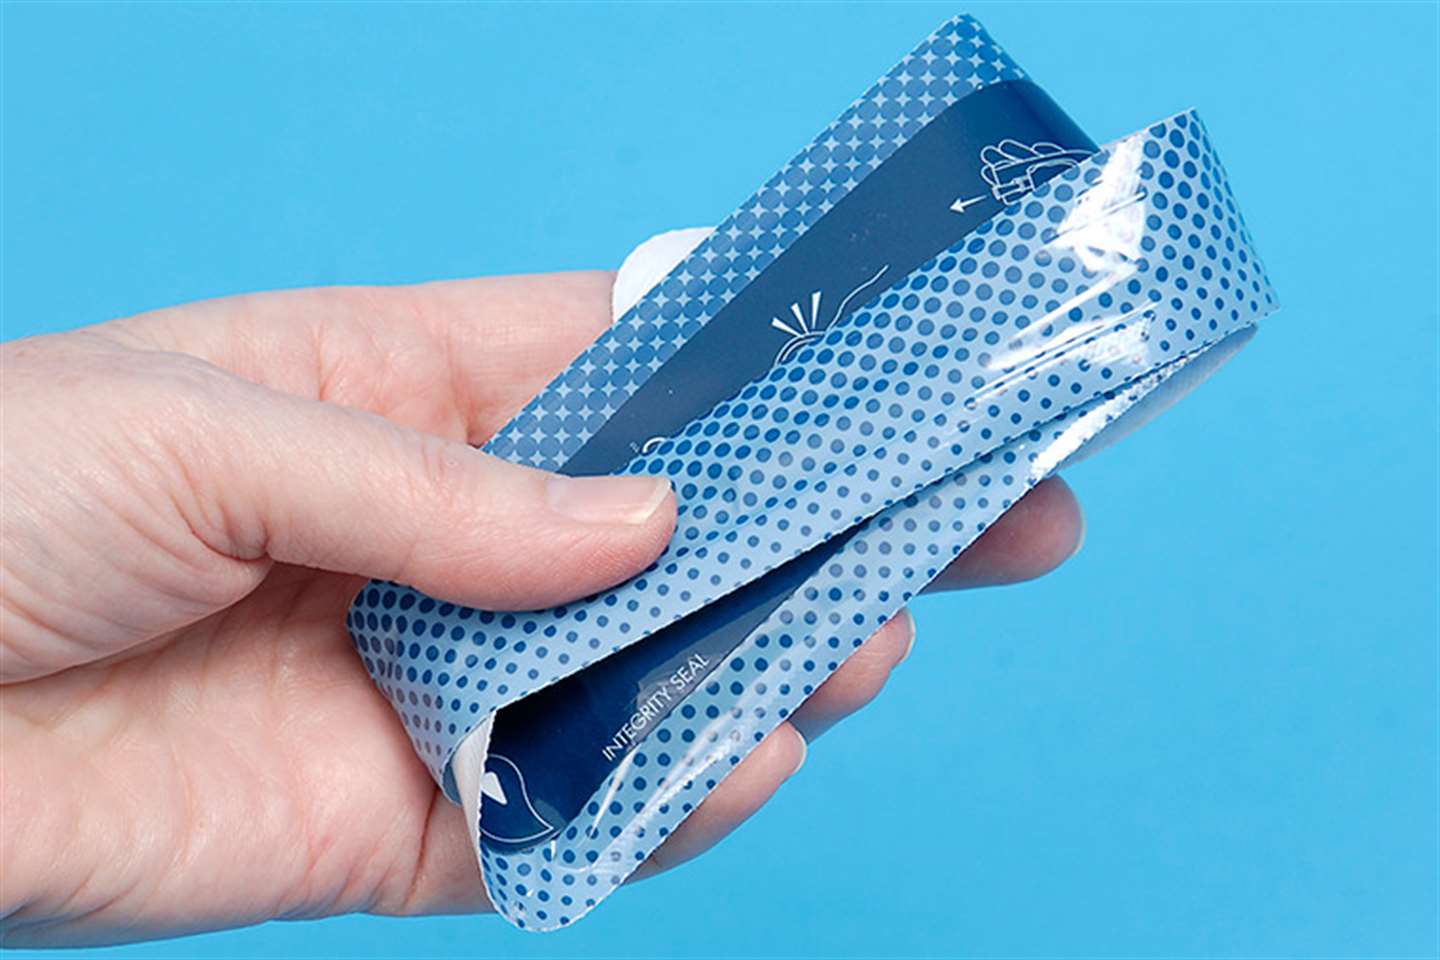 Foldable intermittent catheter for easy carrying